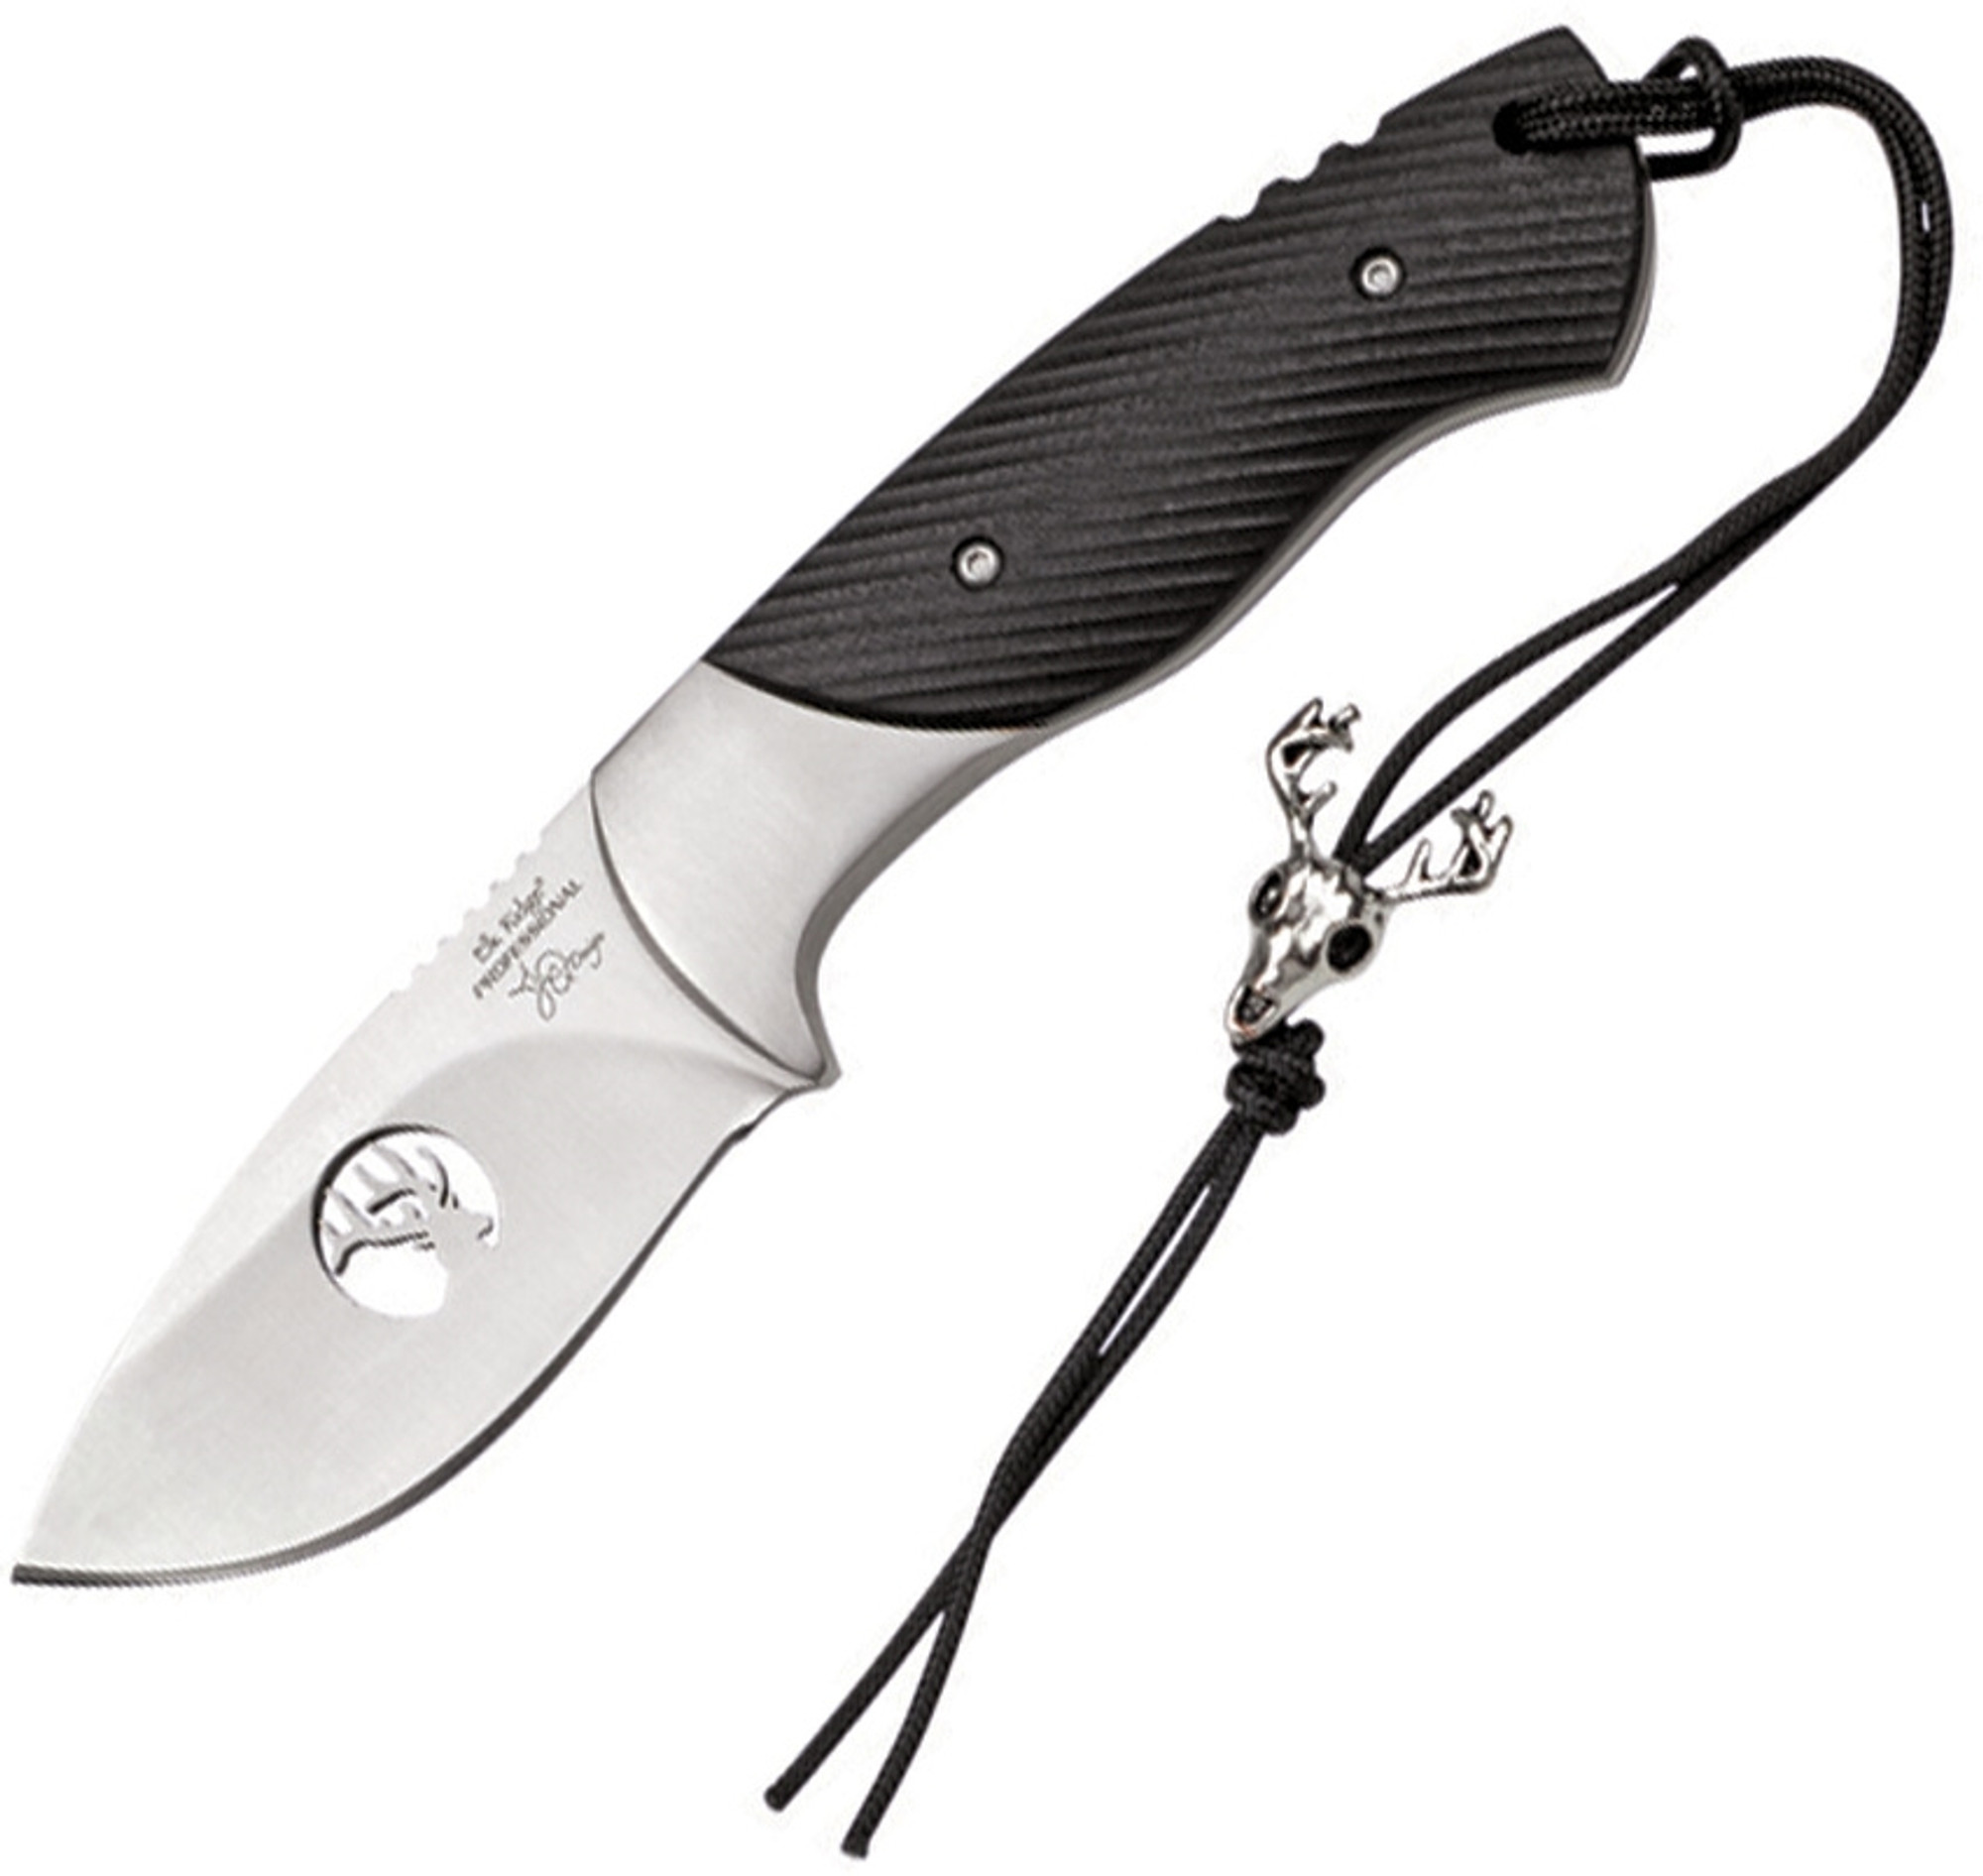 Drop Point Fixed Blade